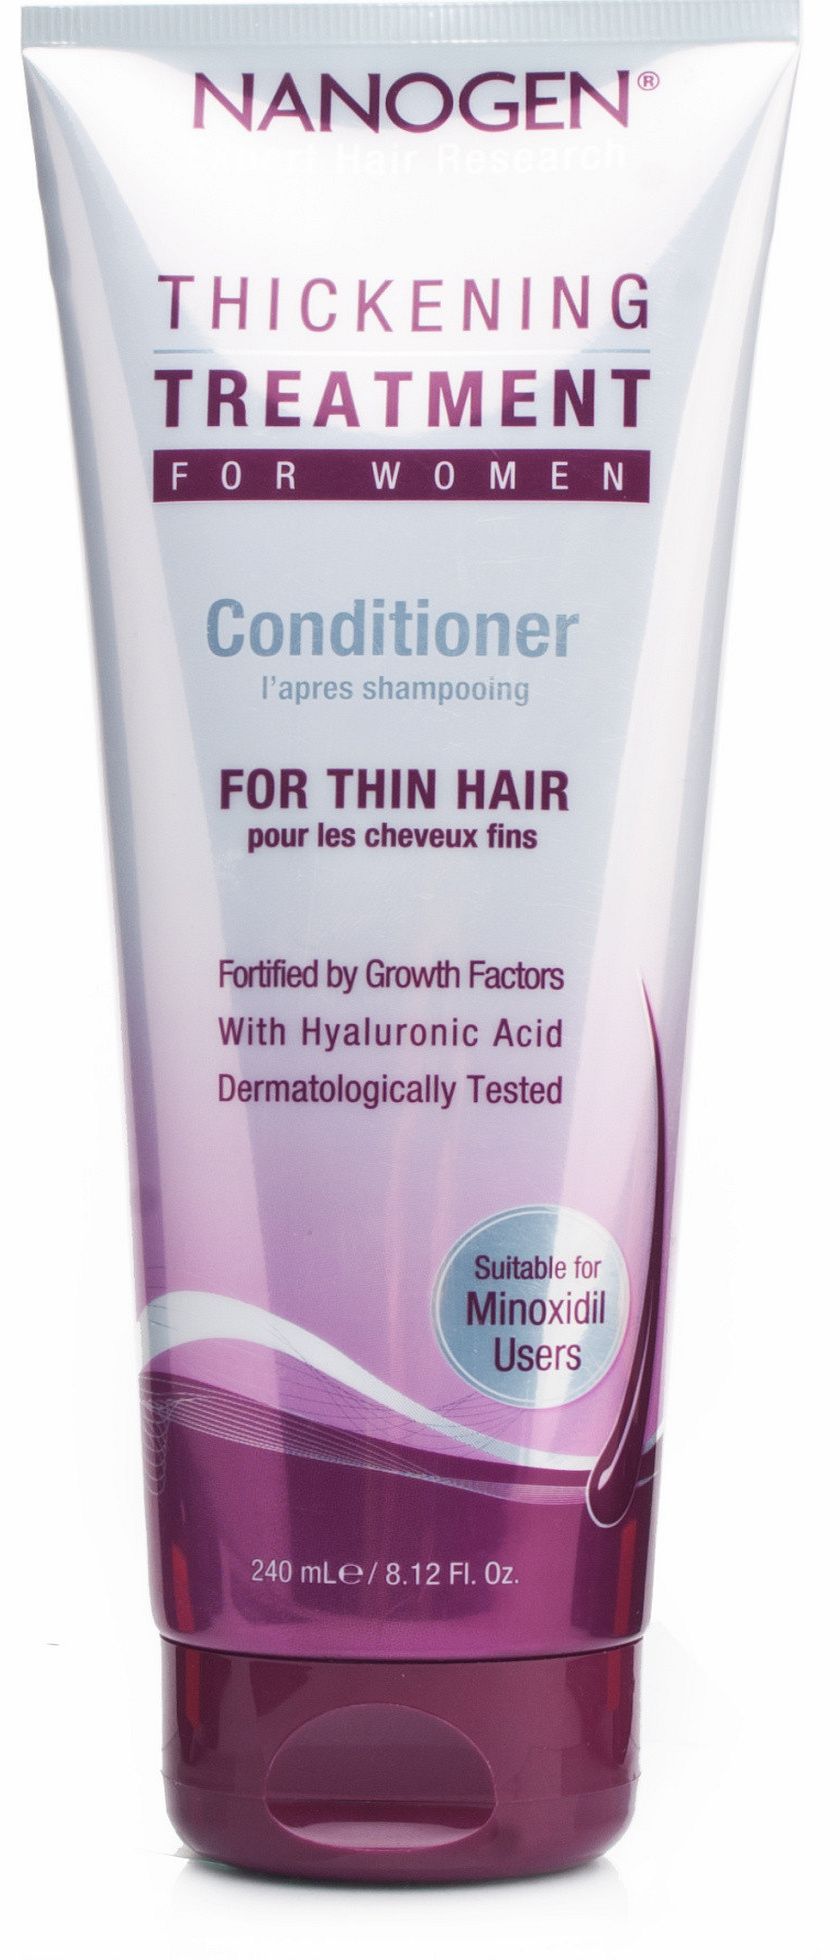 Thickening Treatment Conditioner for Women